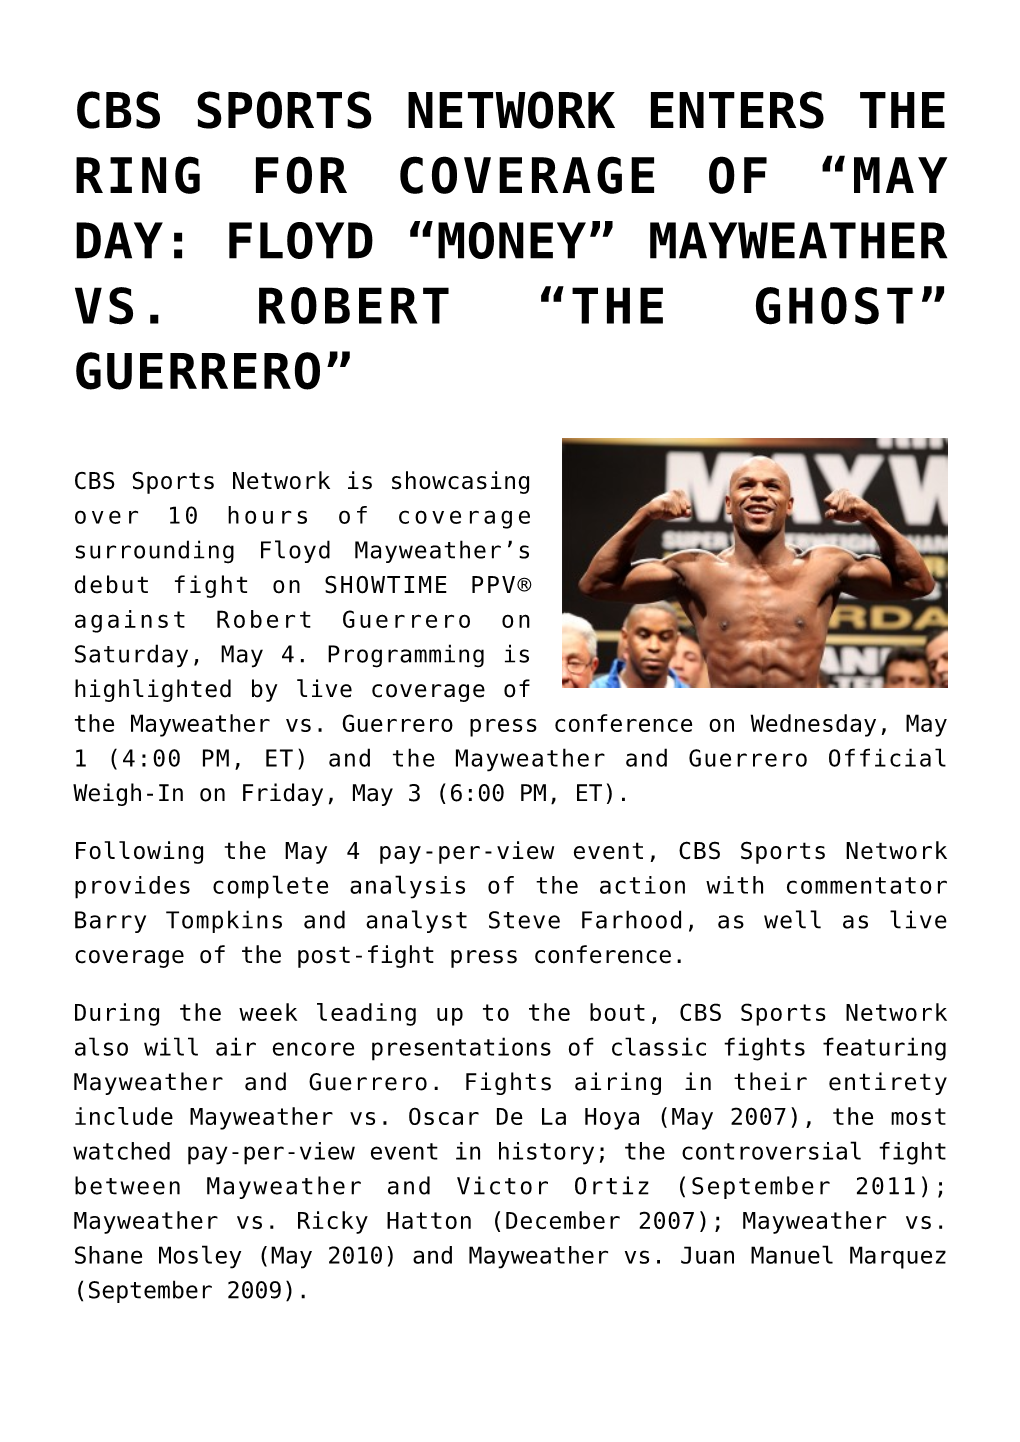 Cbs Sports Network Enters the Ring for Coverage of “May Day: Floyd “Money” Mayweather Vs